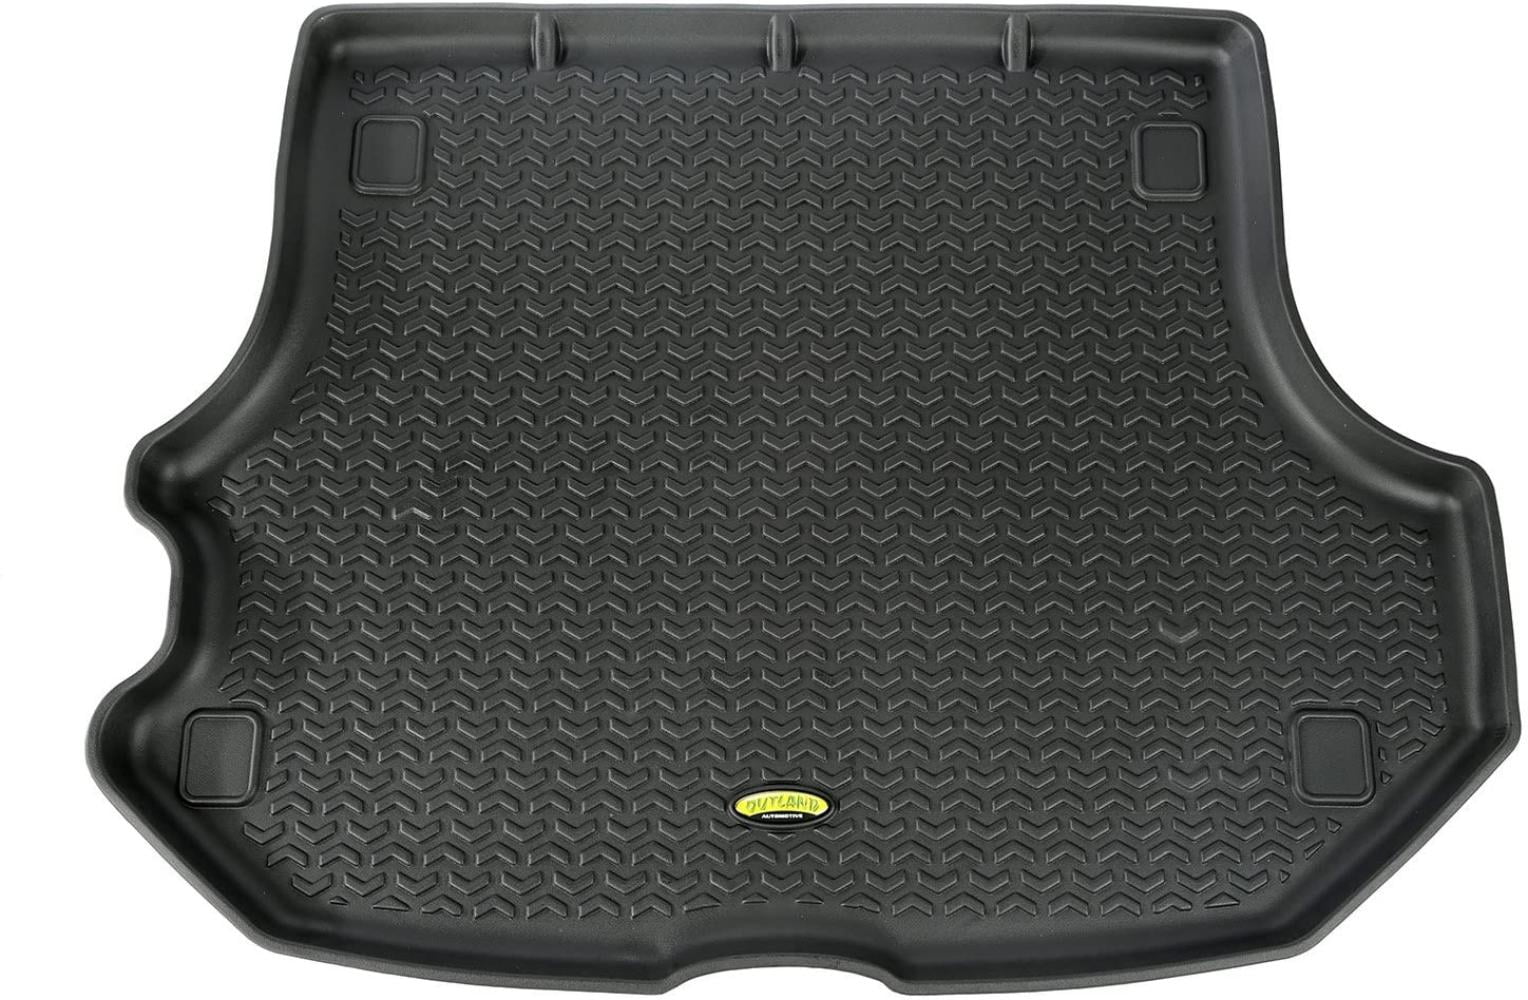 Outland 391297531 Black Cargo Liner For Select Jeep Grand Cherokee Models 